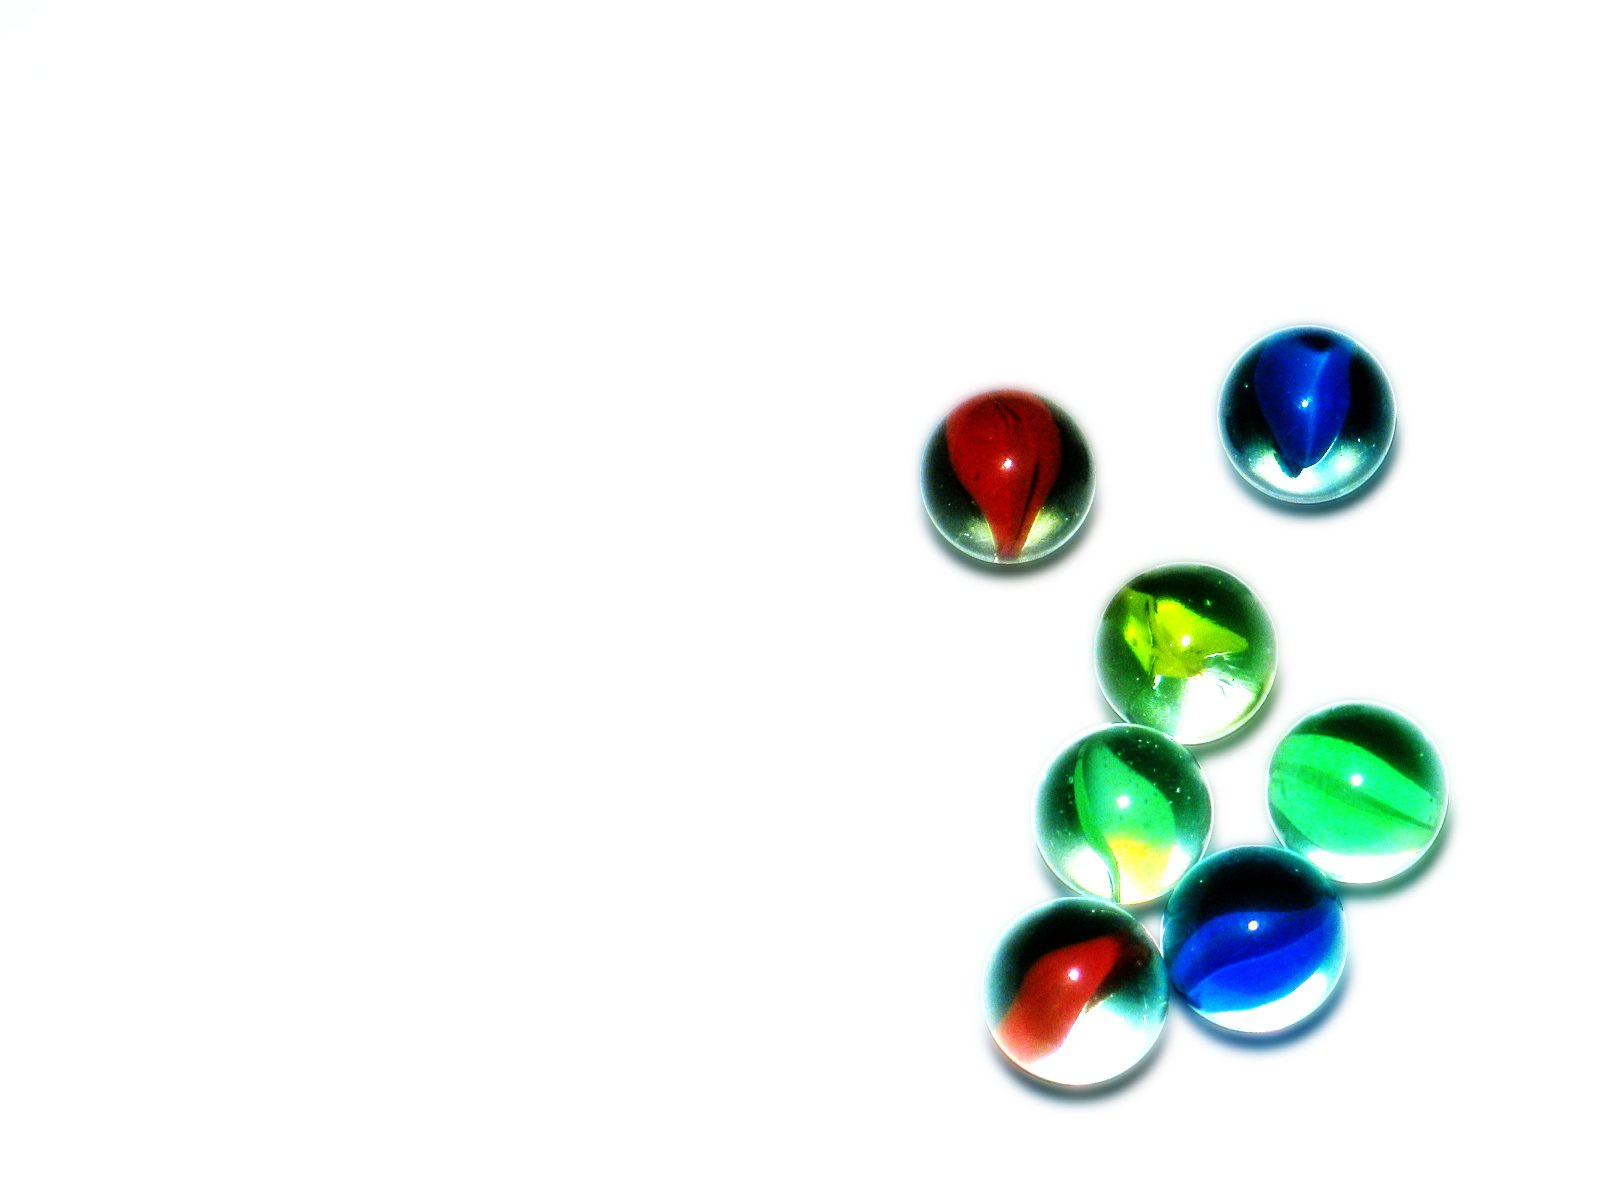 several circular glass beads laying on the floor